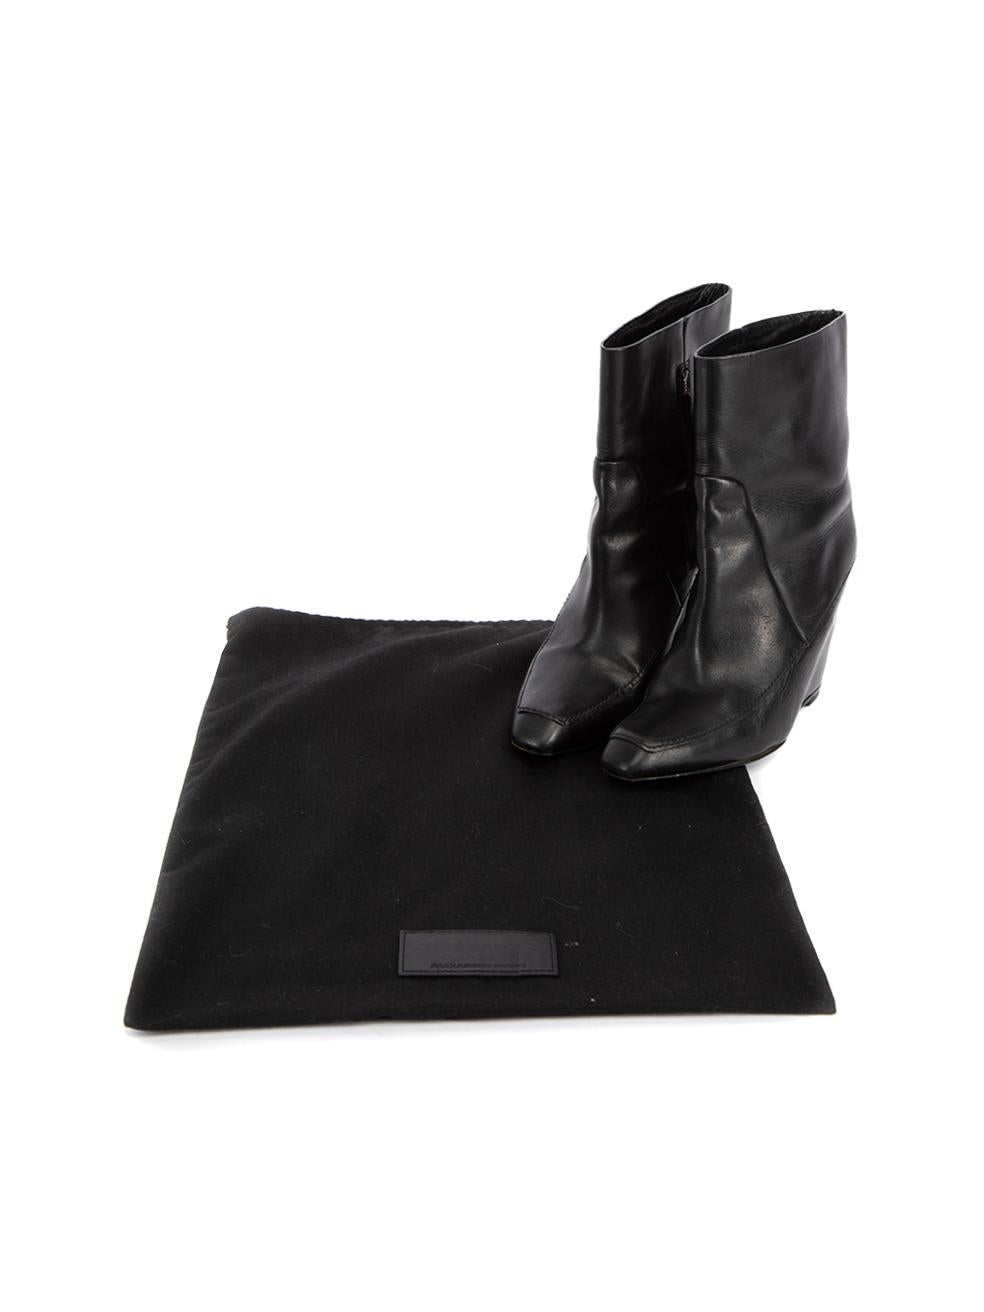 Pre-Loved Alexander Wang Women's Black Leather Zip Up Wedge Boots In Excellent Condition In London, GB